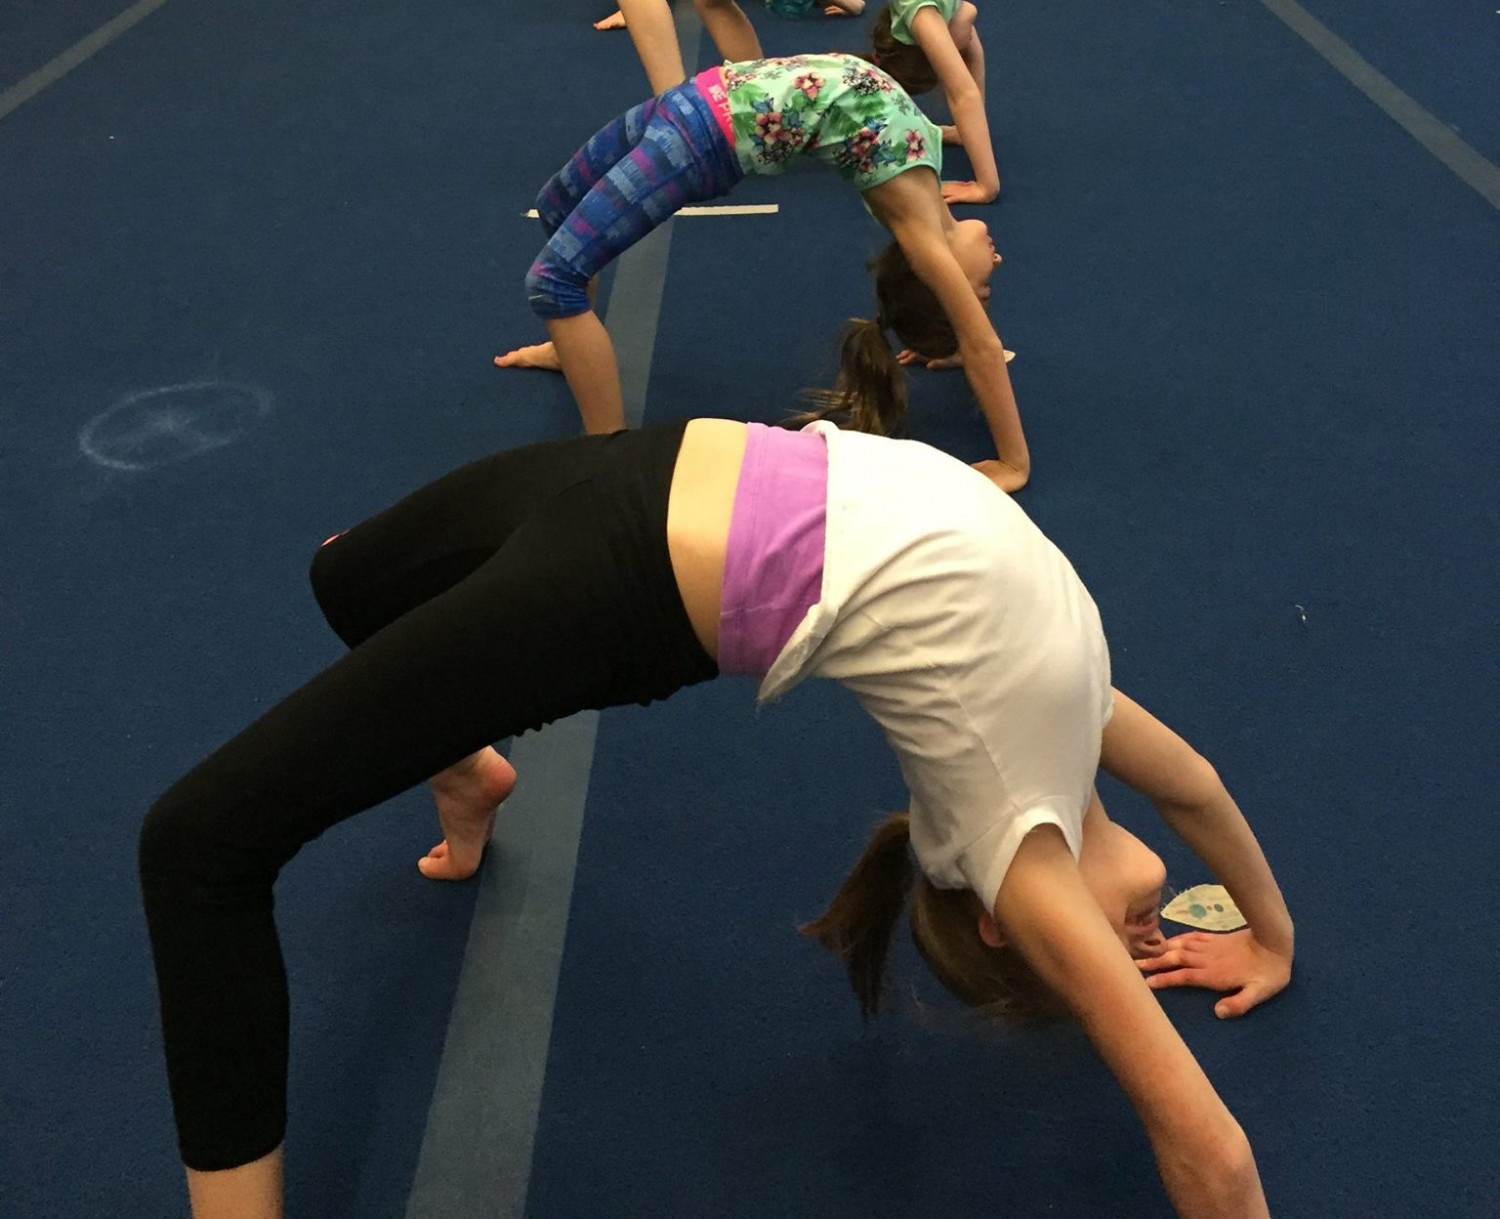 So You Want To Try Acroyoga? Get Started With These 4 Poses - Camilla Mia